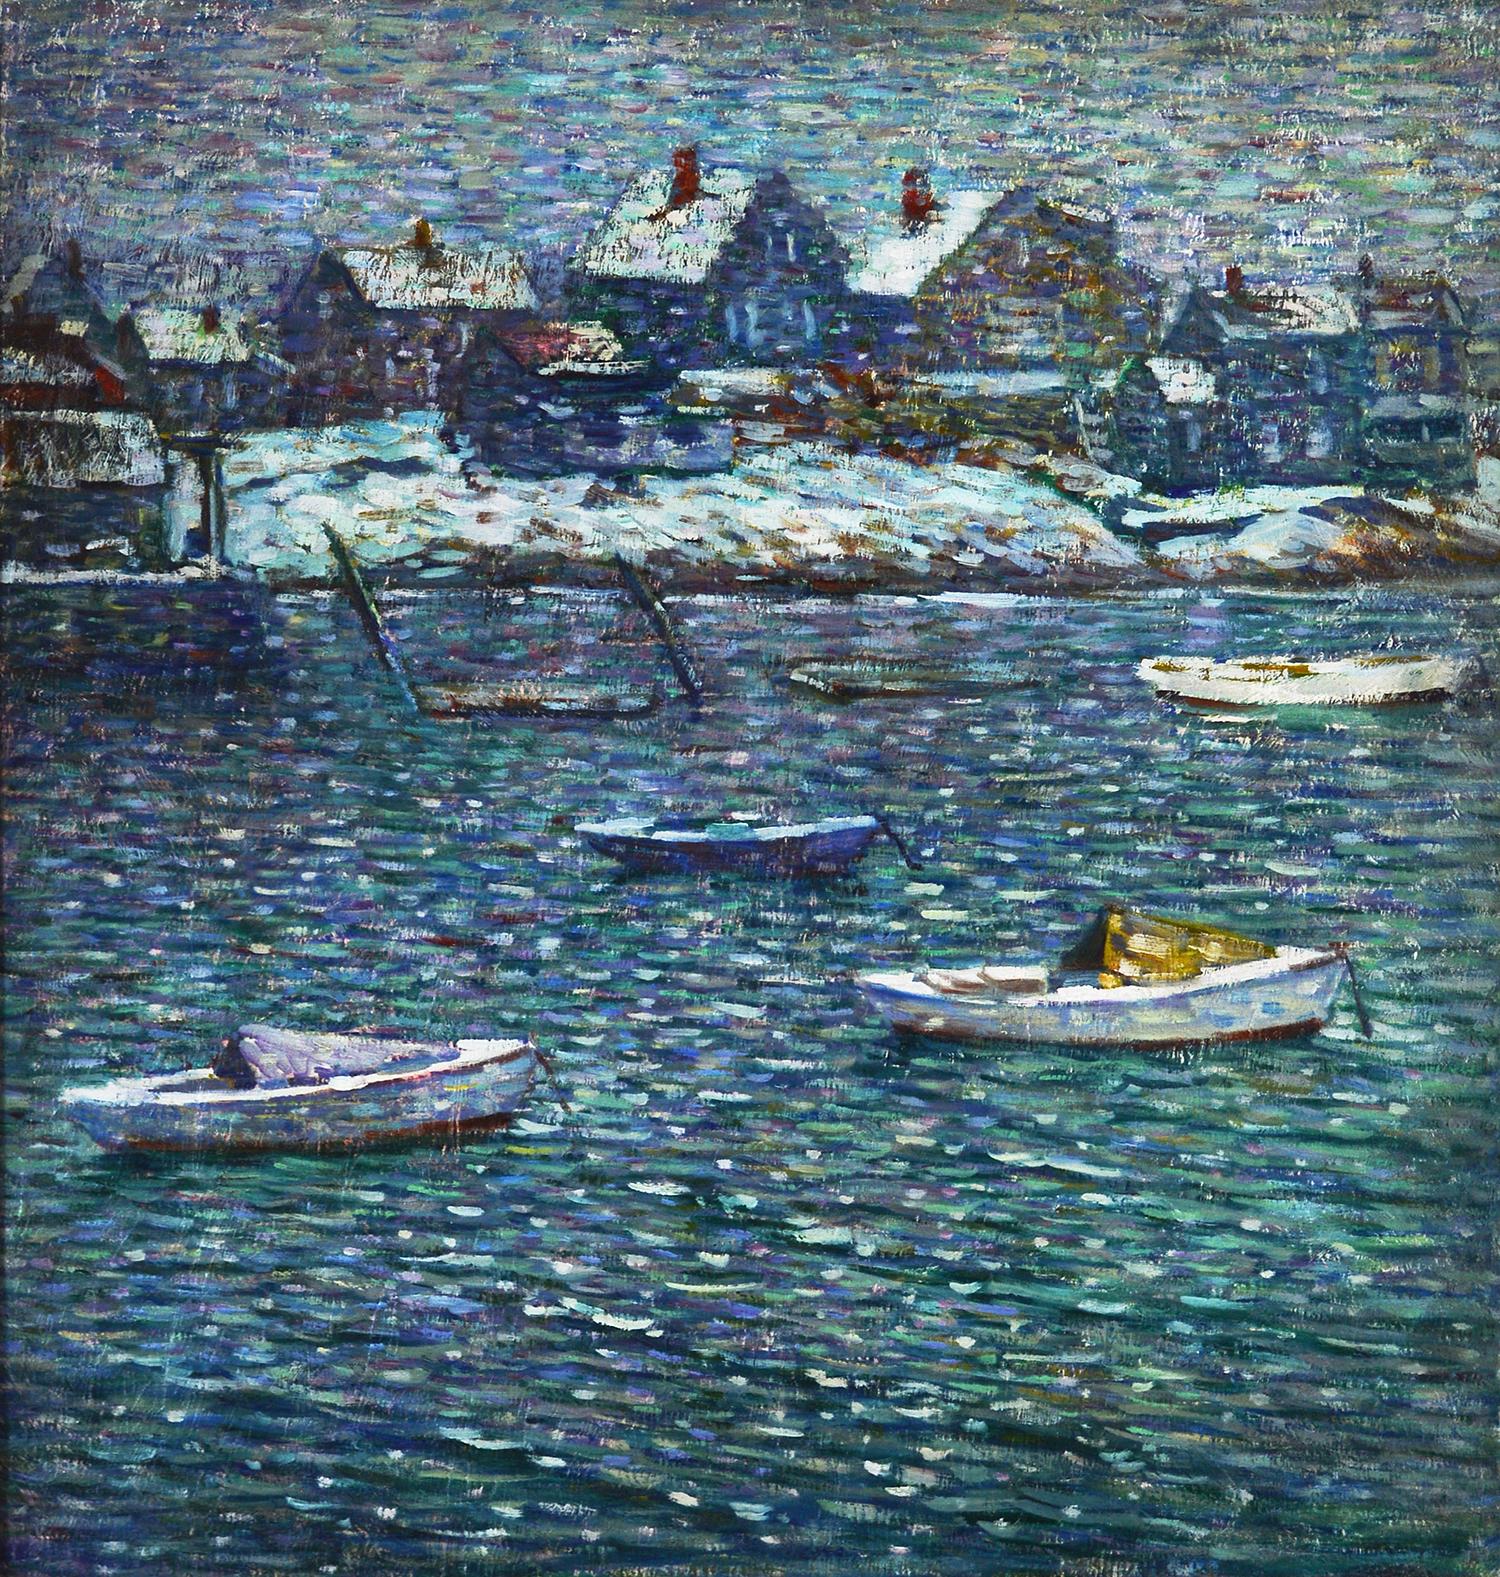 Boats in Winter - Painting by Charles Salis Kaelin